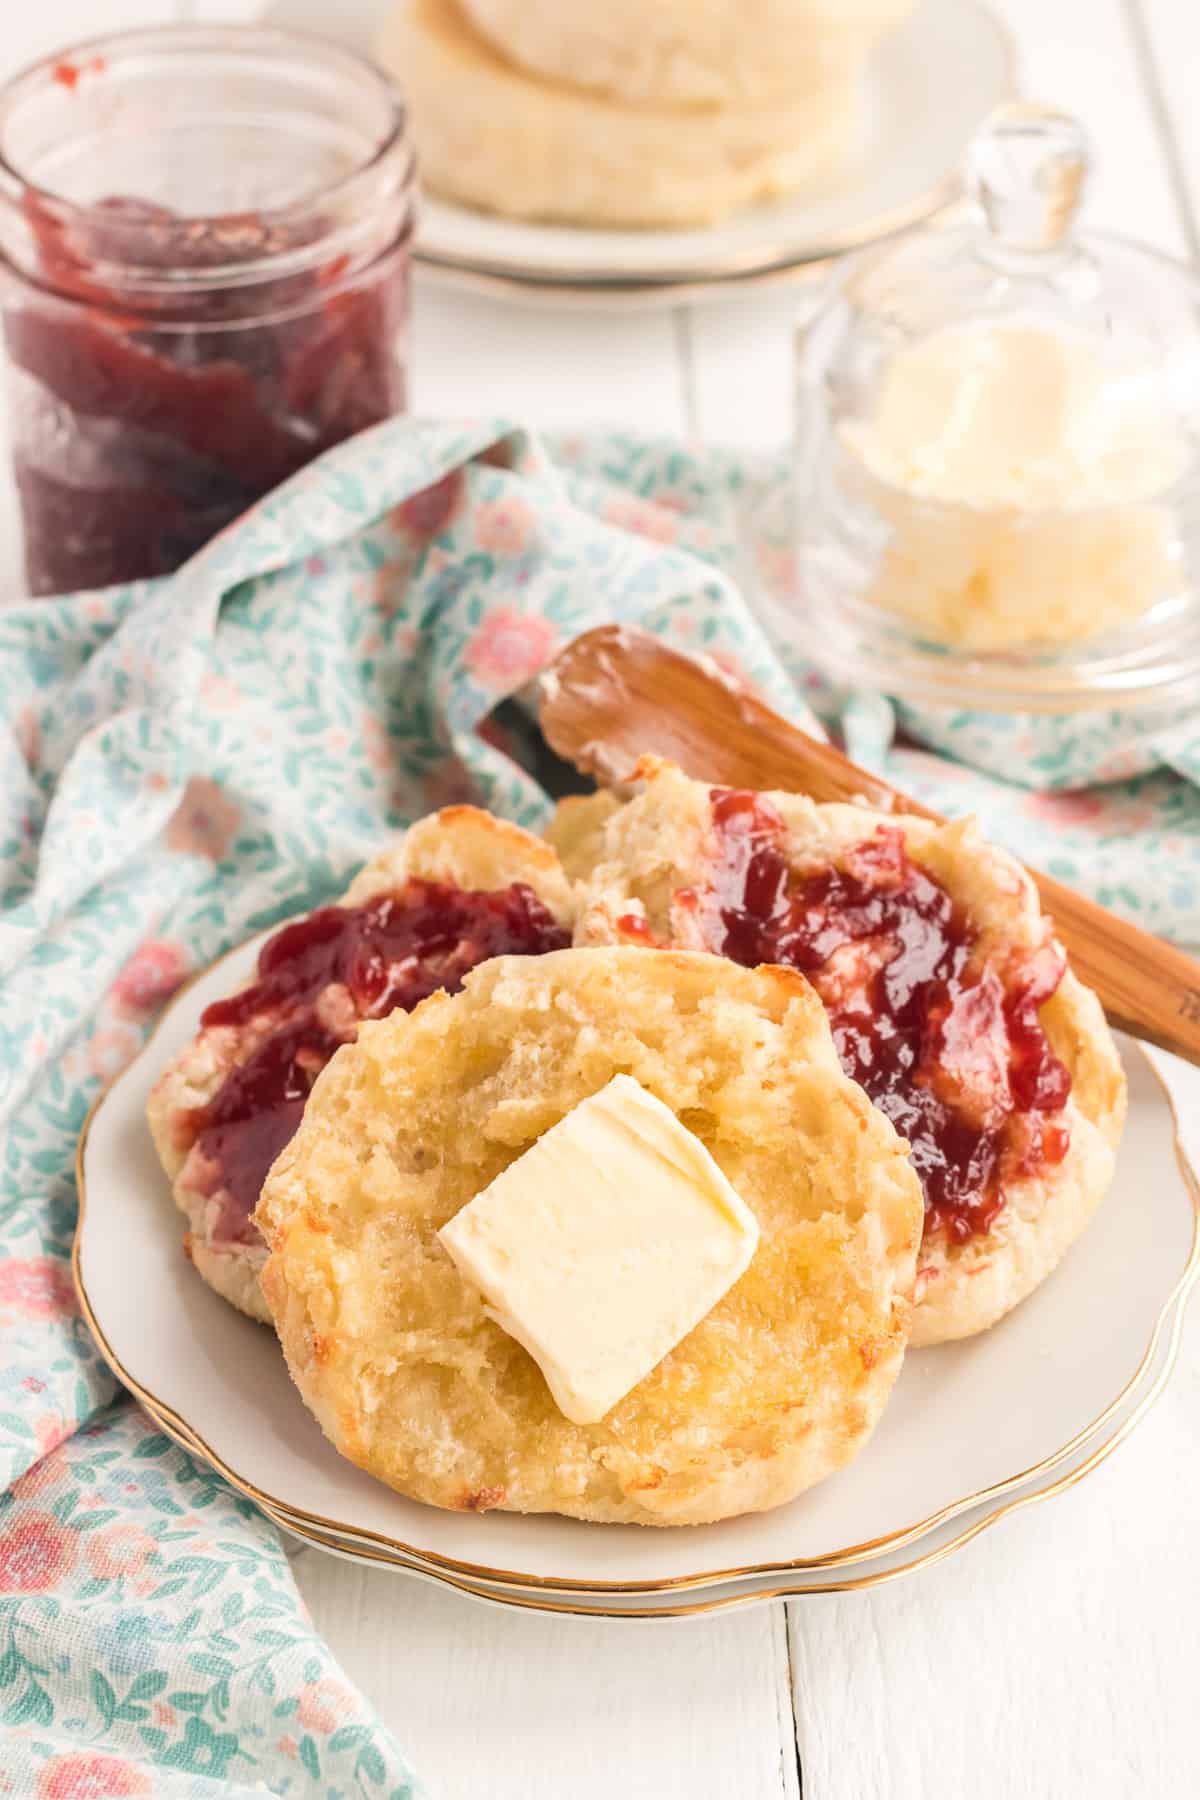 English muffins with jelly and a pat of butter.